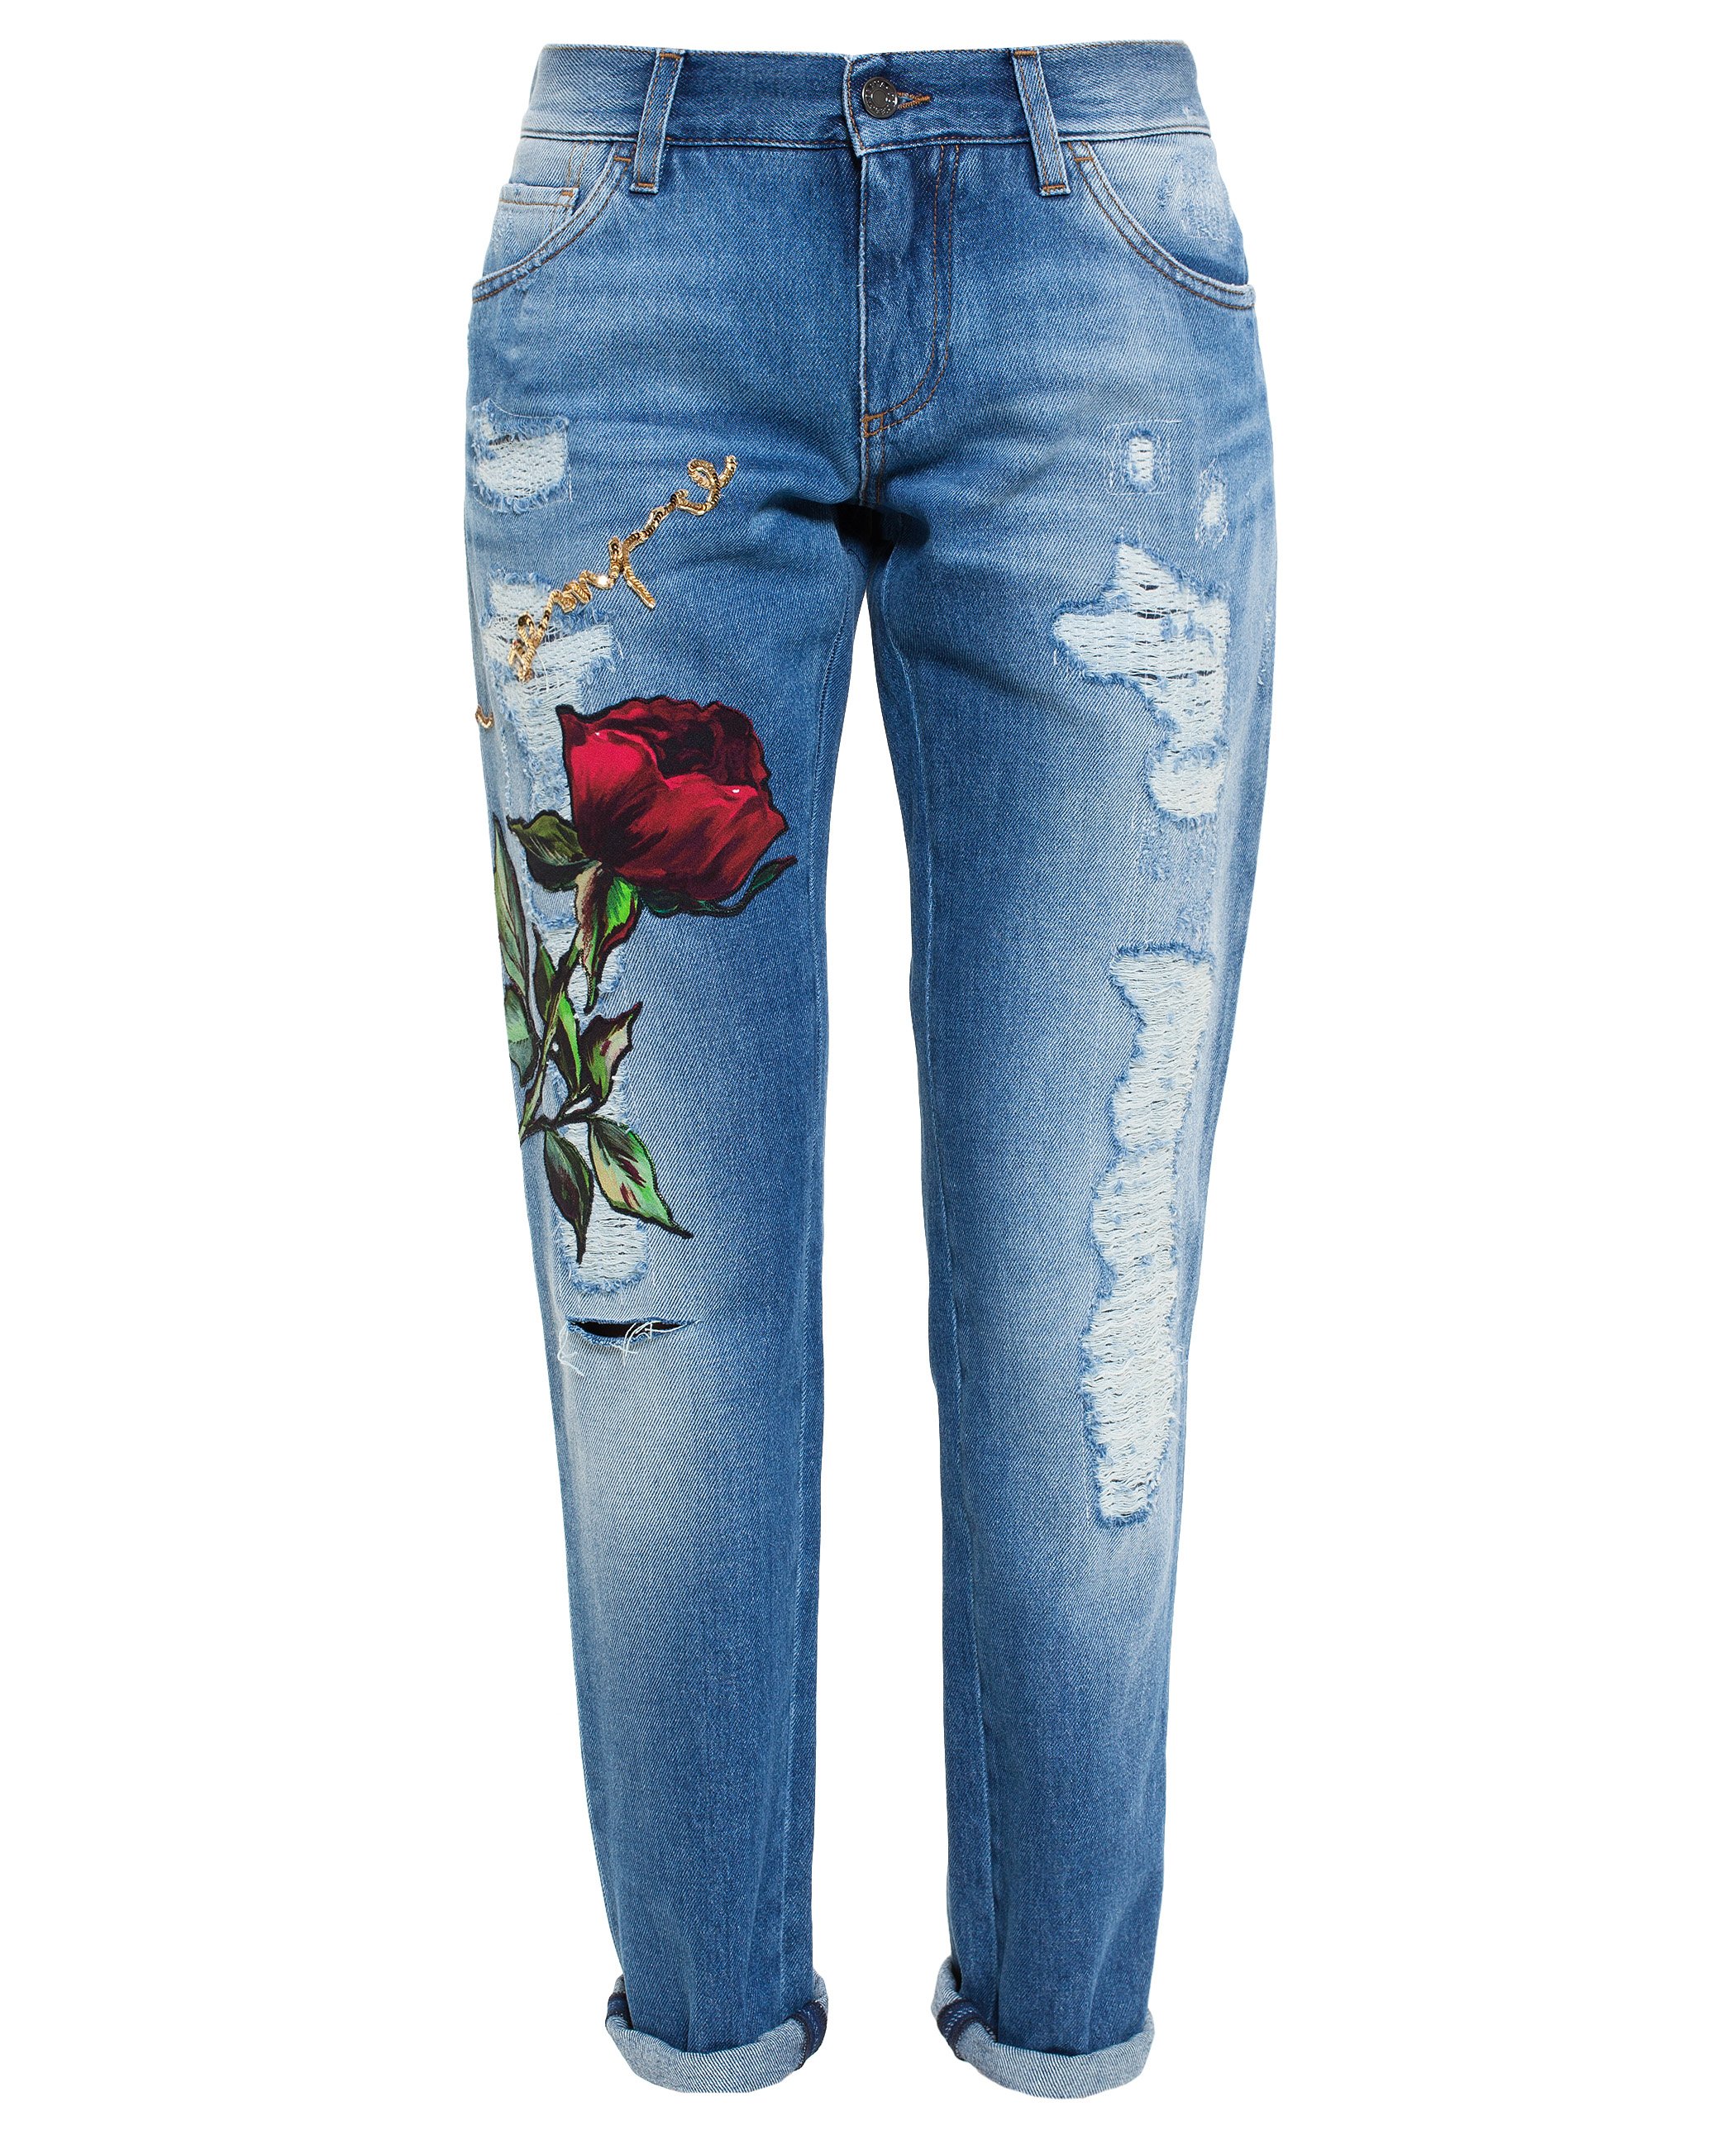 Dolce & gabbana Roses Embroidered Jeans in Blue | Lyst